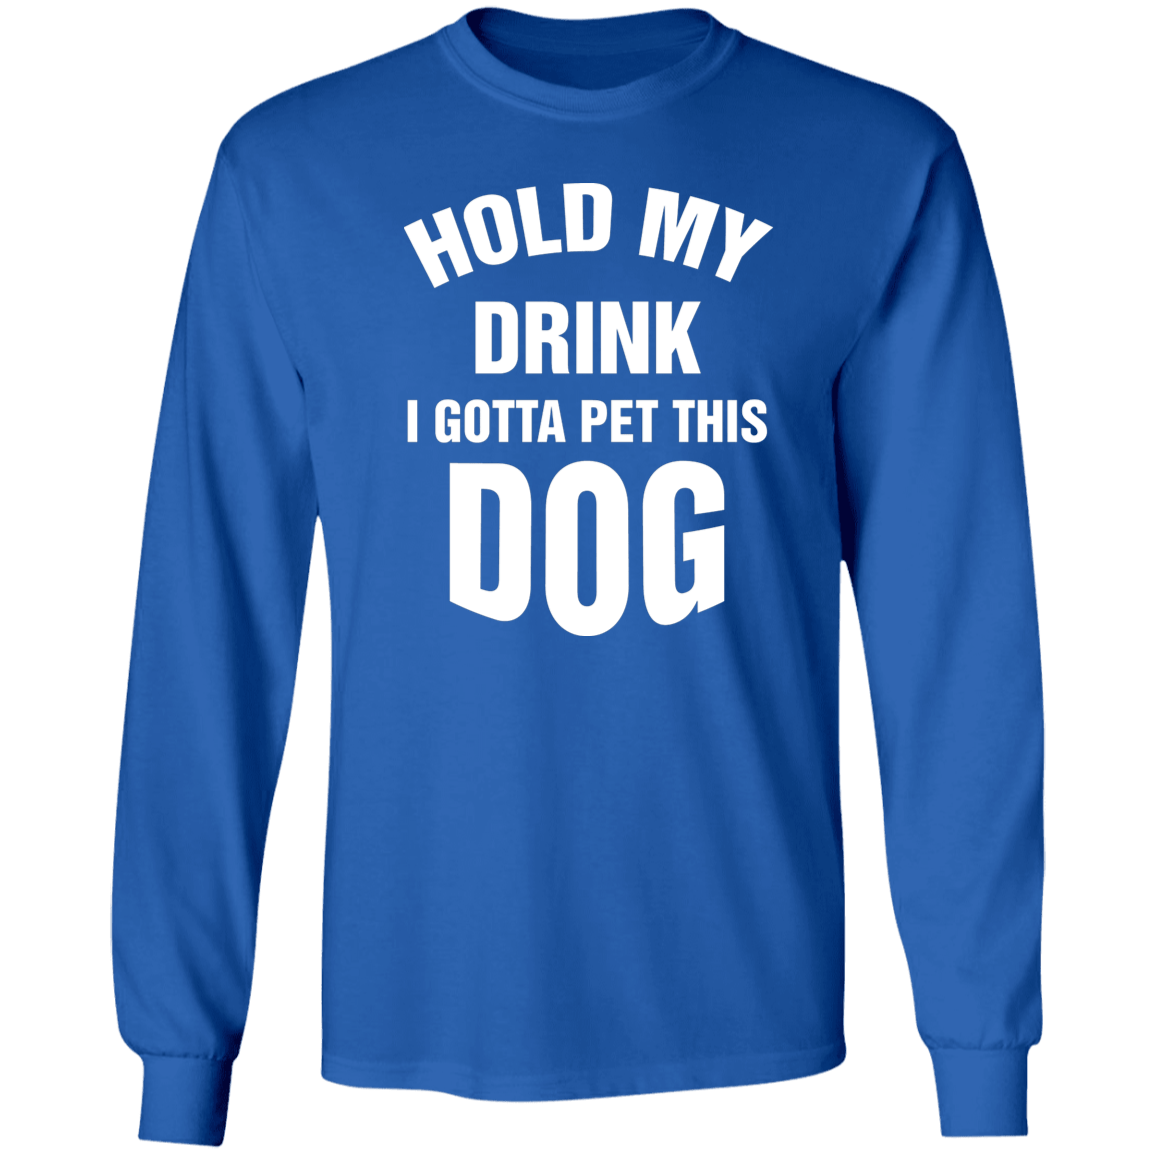 Hold My Drink - Long Sleeve T Shirt.